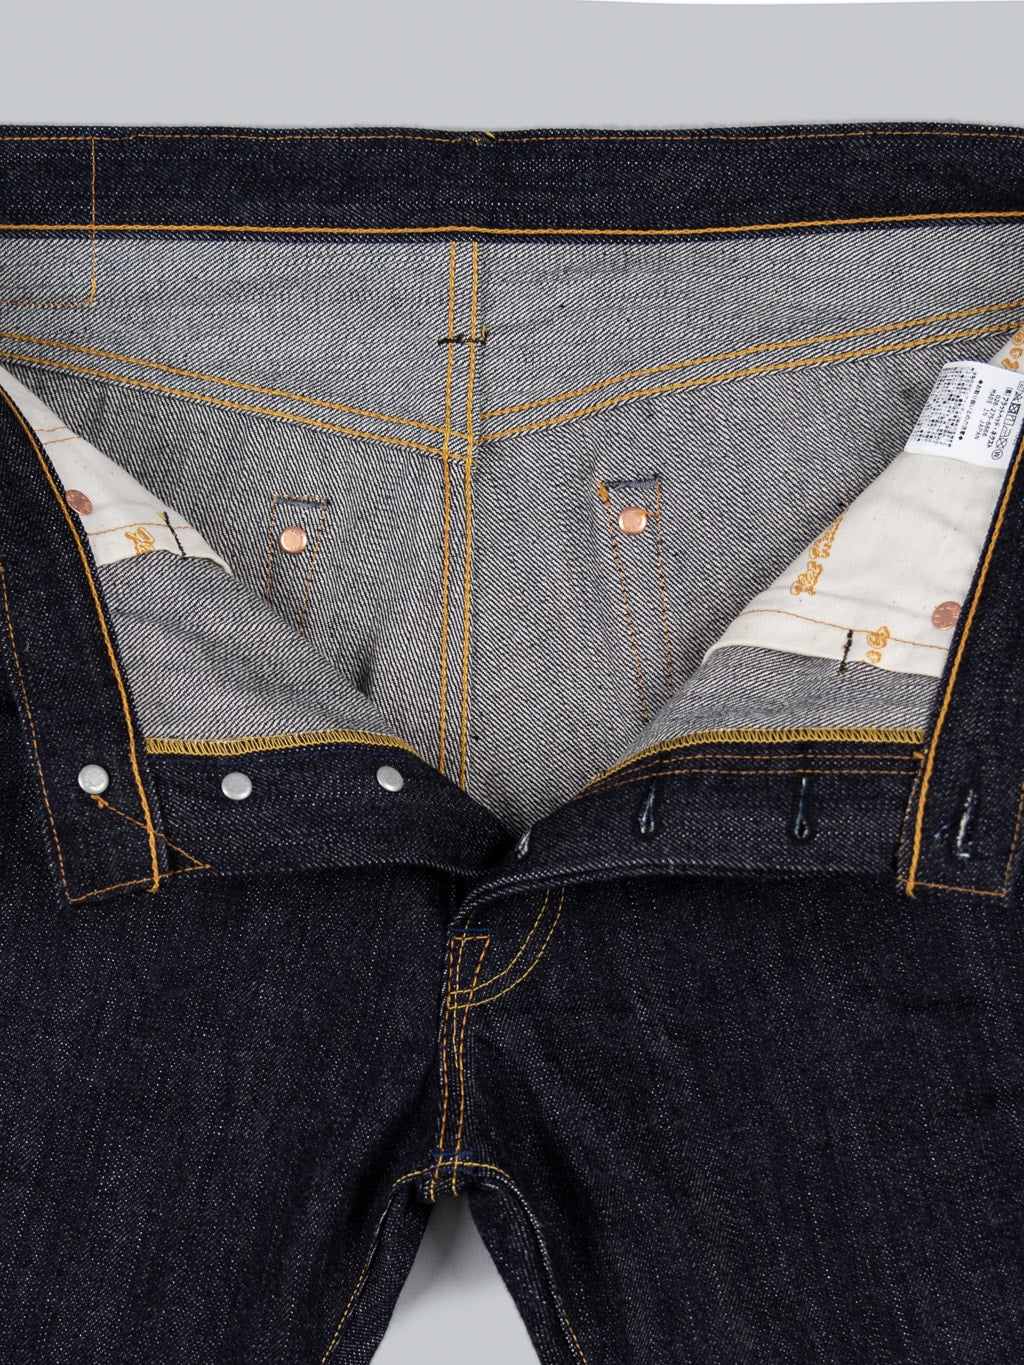 The Flat Head 3002 14.5oz Slim Tapered selvedge Jeans interior texture